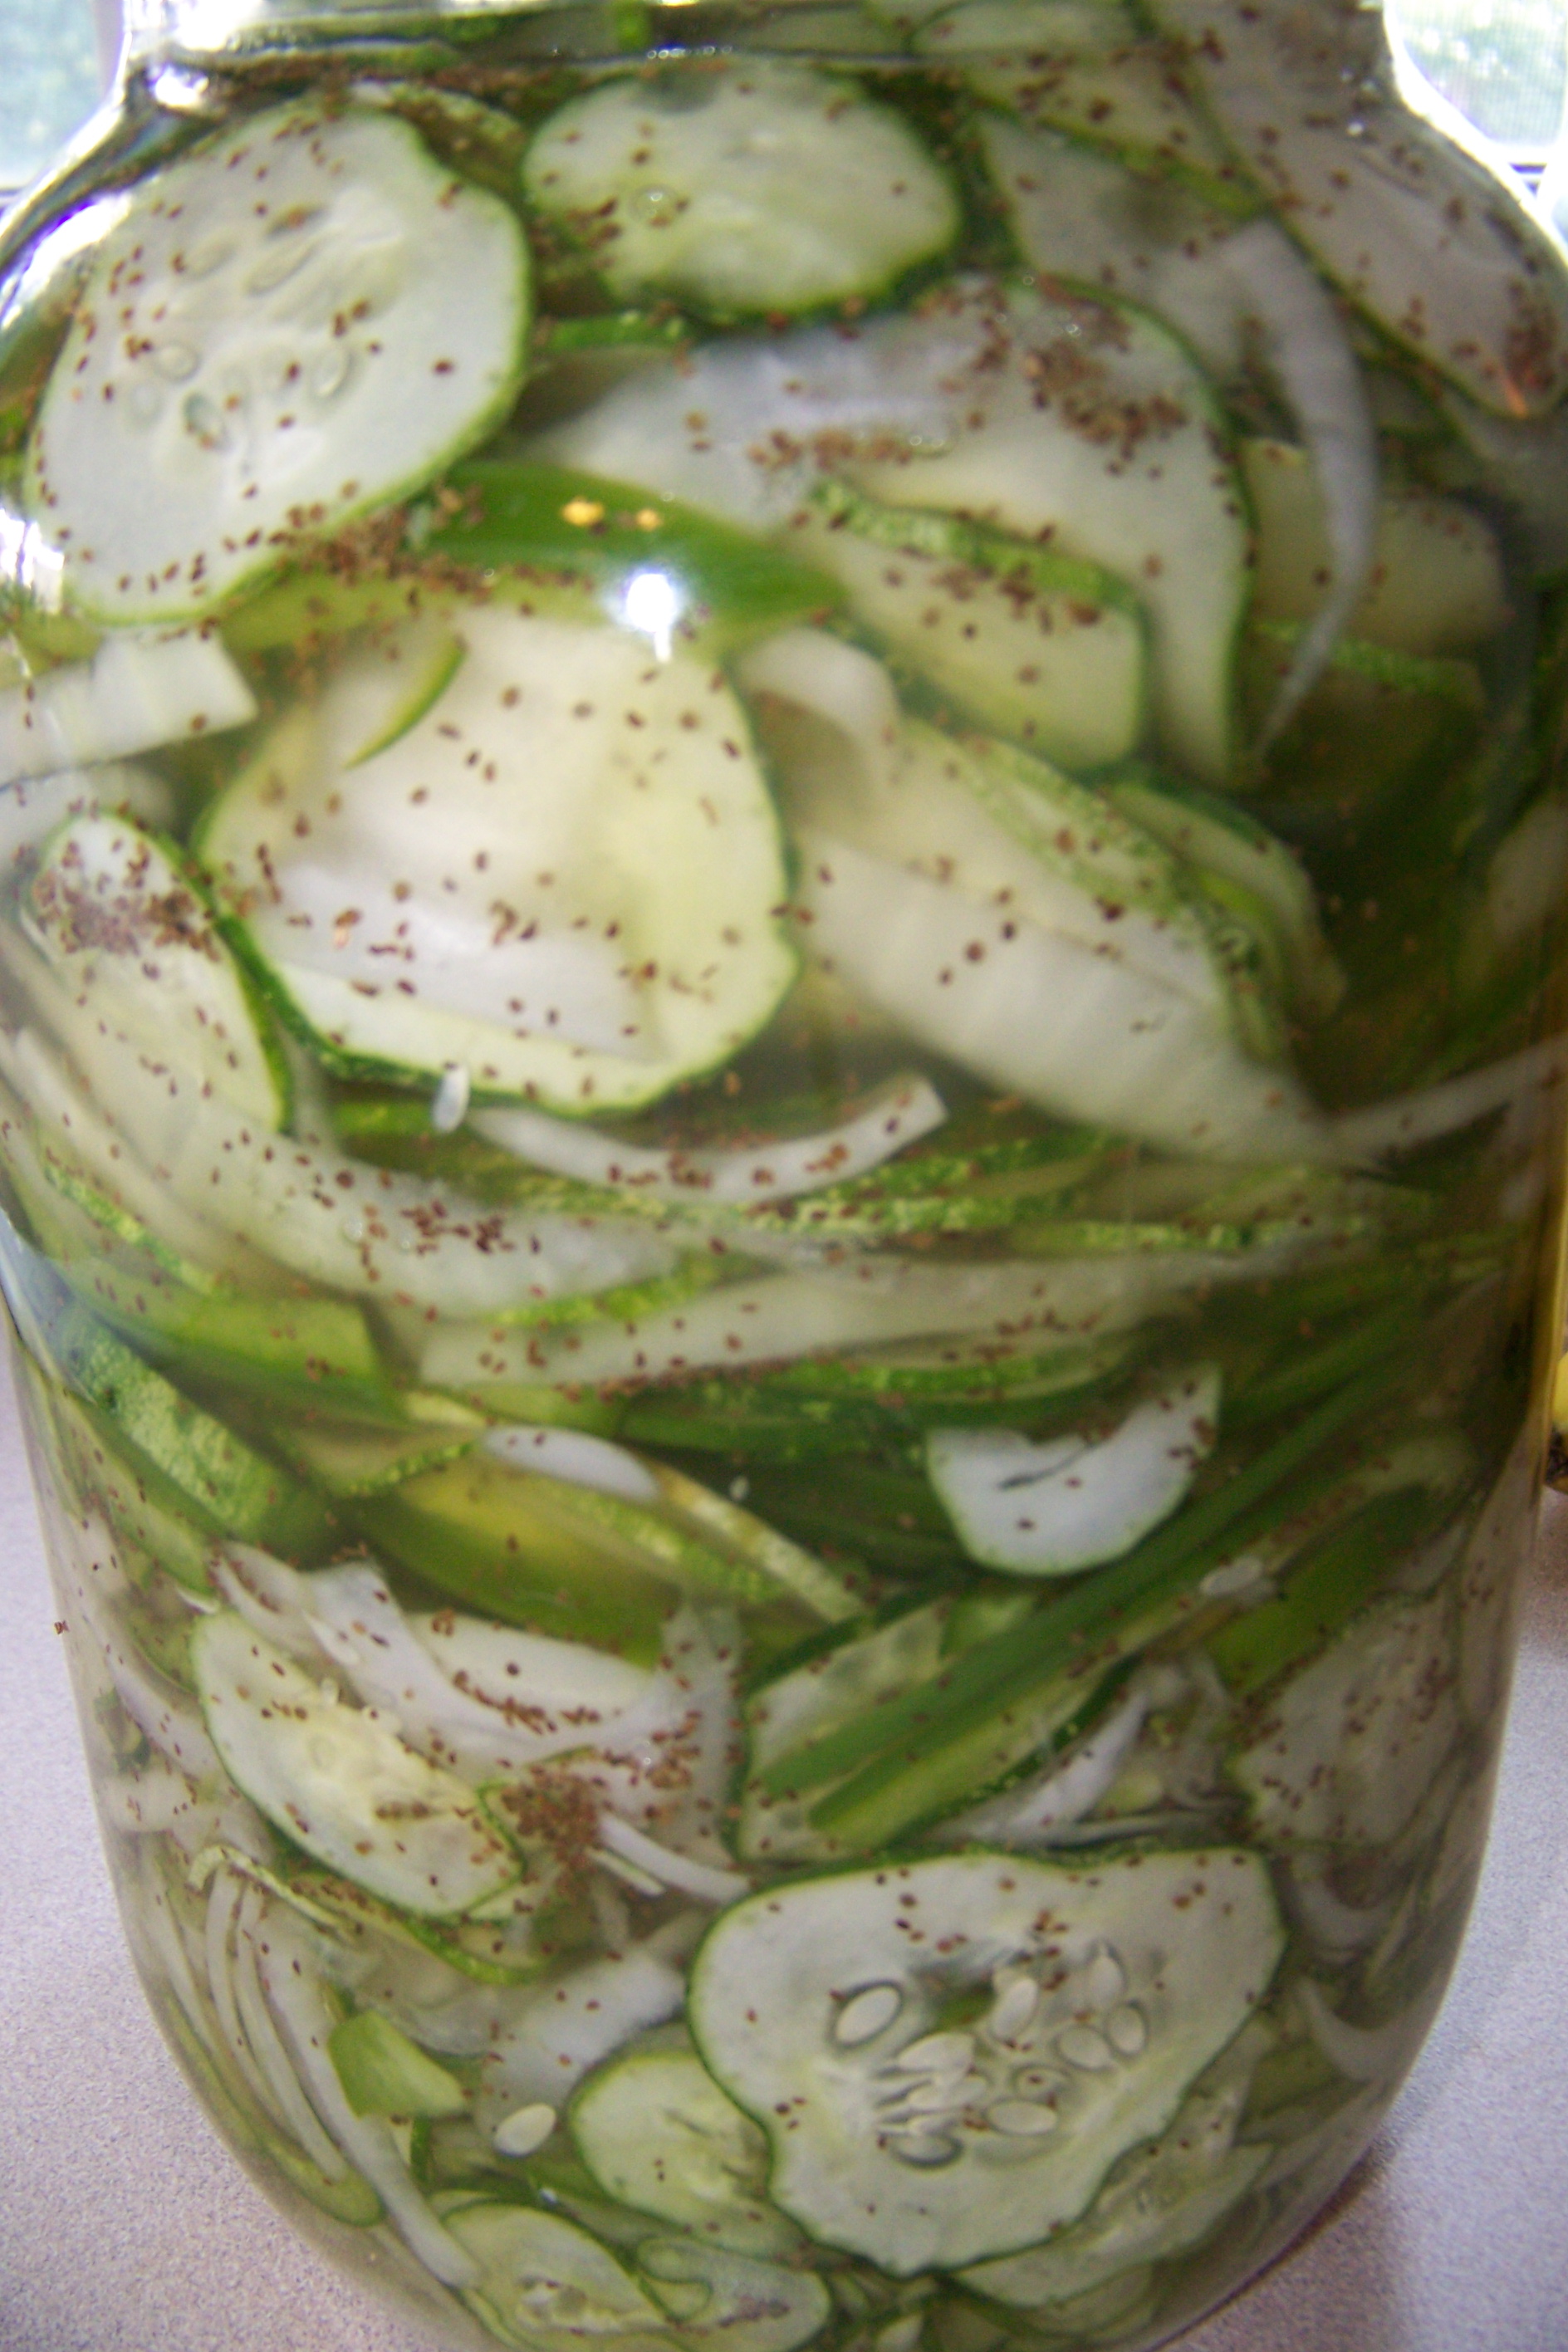 mamaw’s refrigerator bread and butter pickles